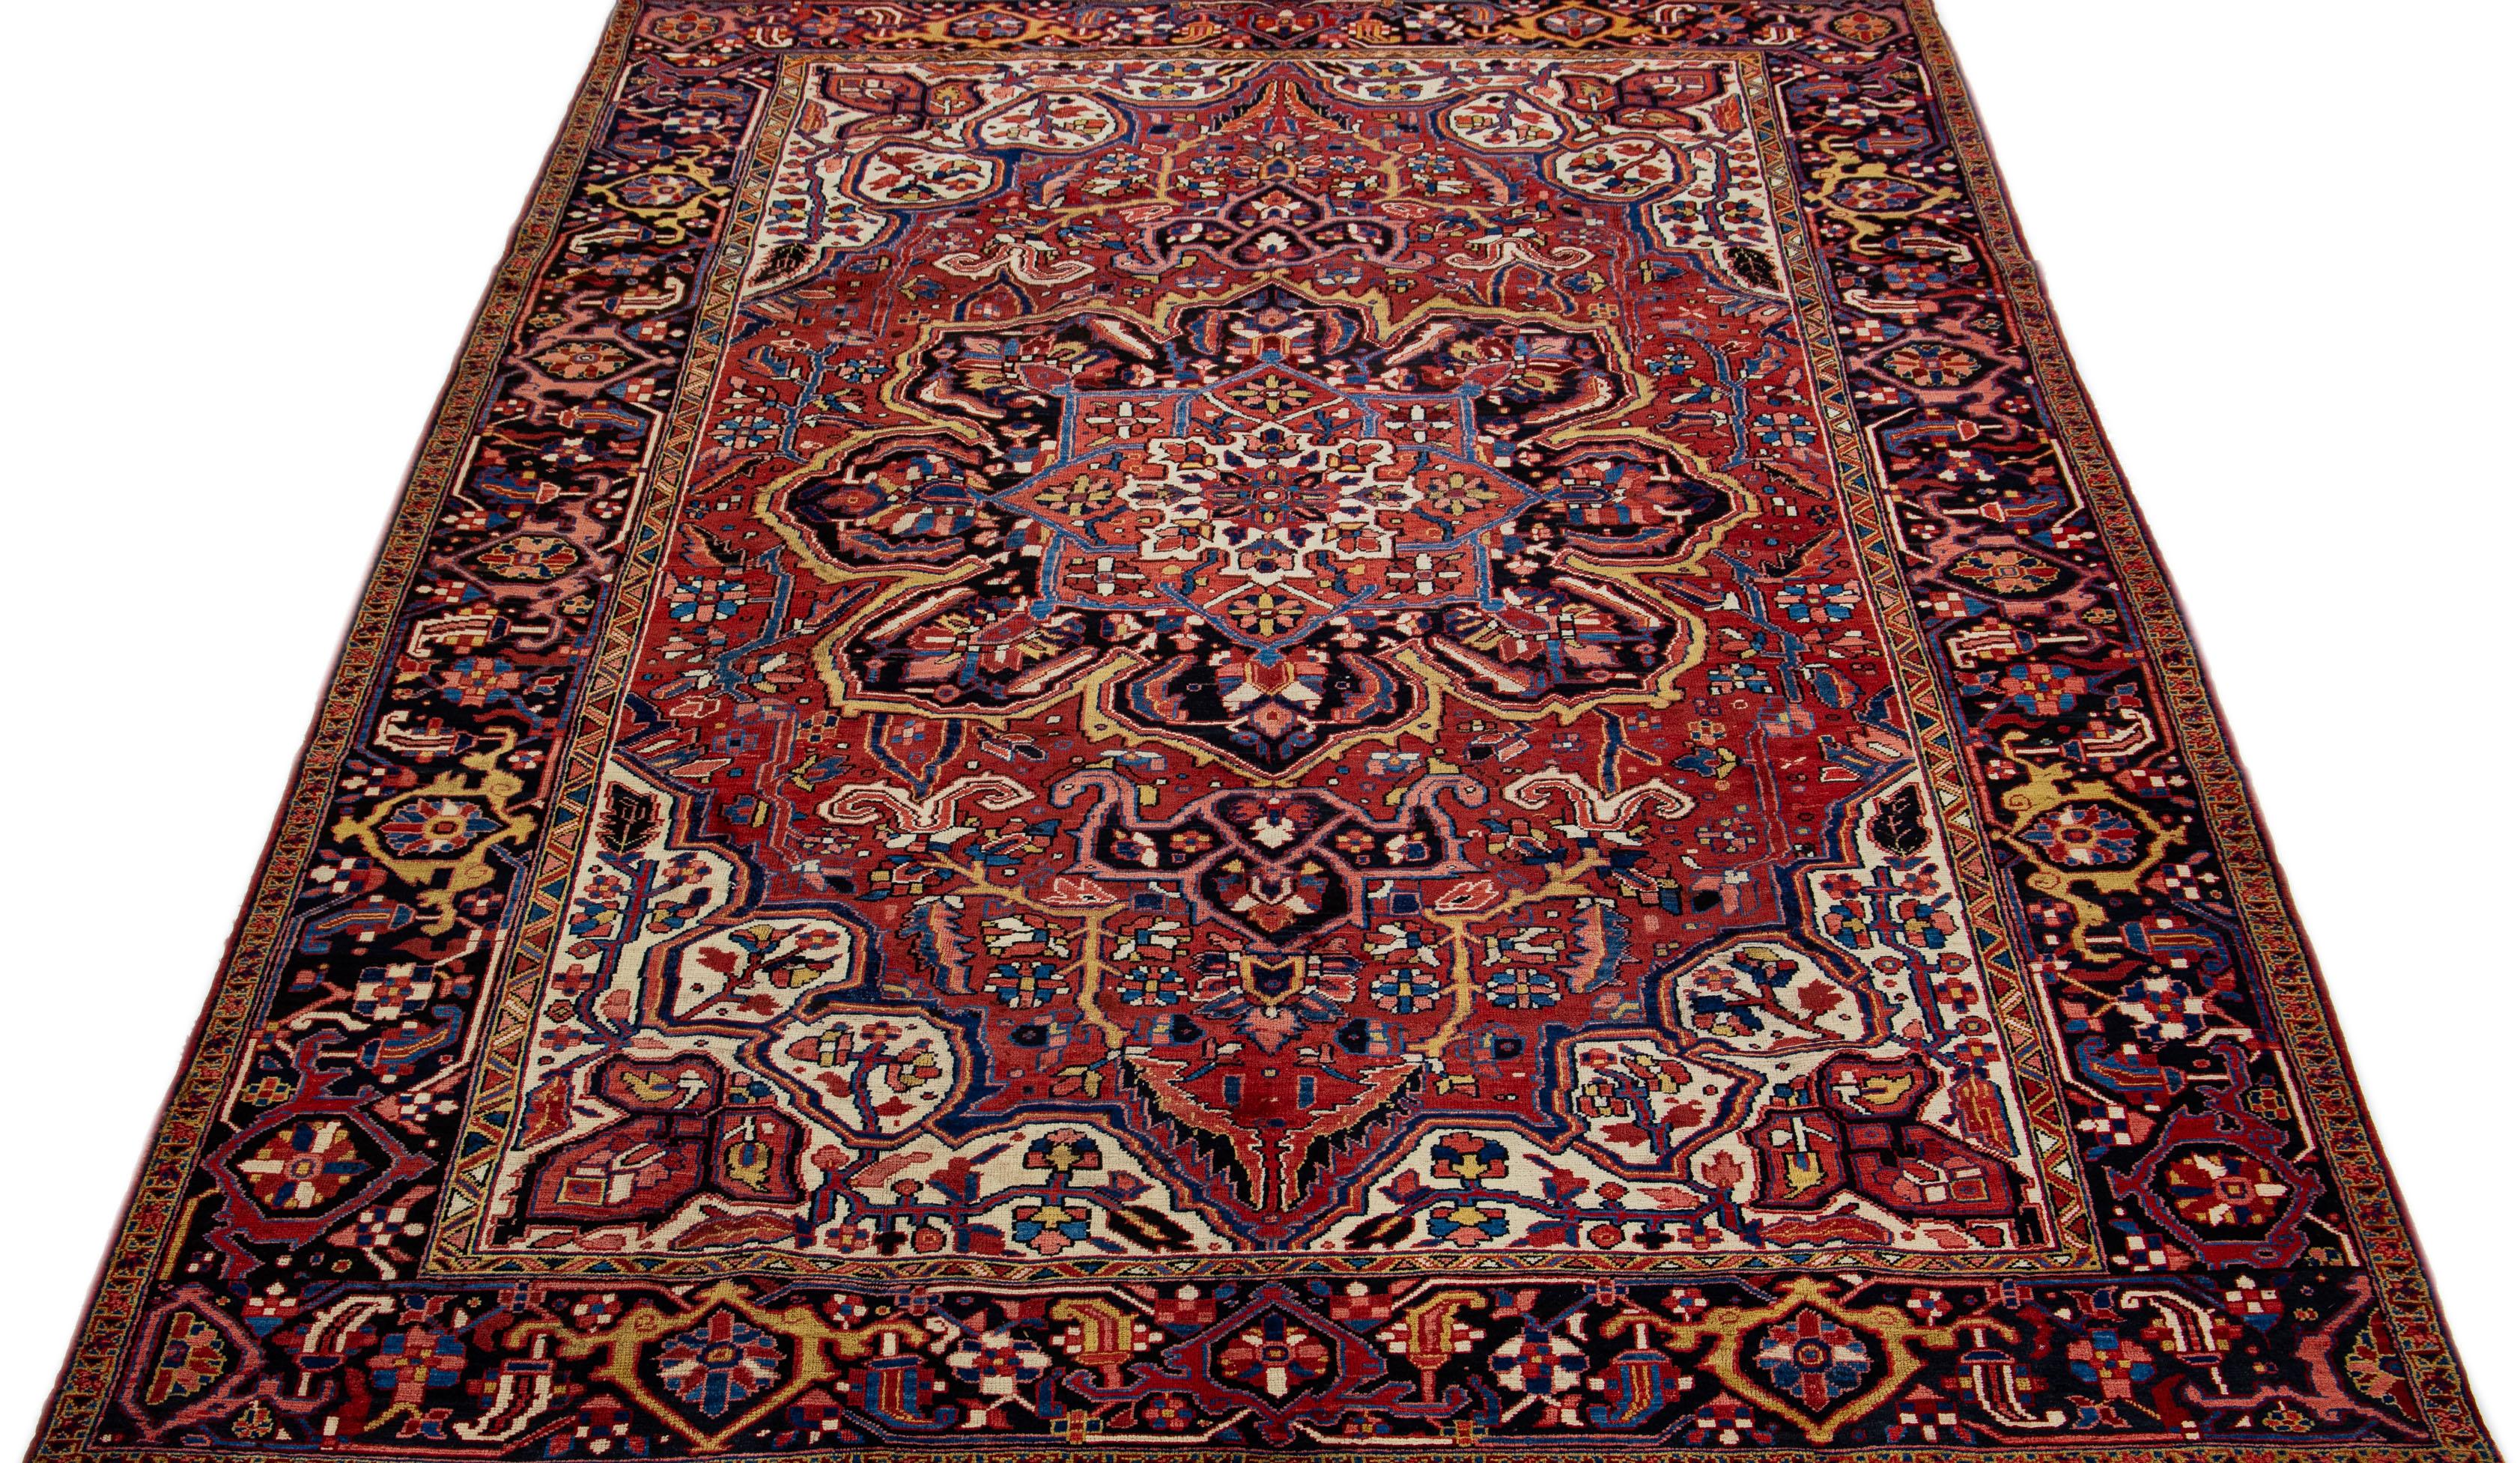 This is a stunning vintage Persian Heriz rug, artfully handcrafted using wool and featuring a vibrant red color field. The rug boasts an attractive dark blue frame with bright accents, cleverly arranged in an all-over geometric medallion pattern